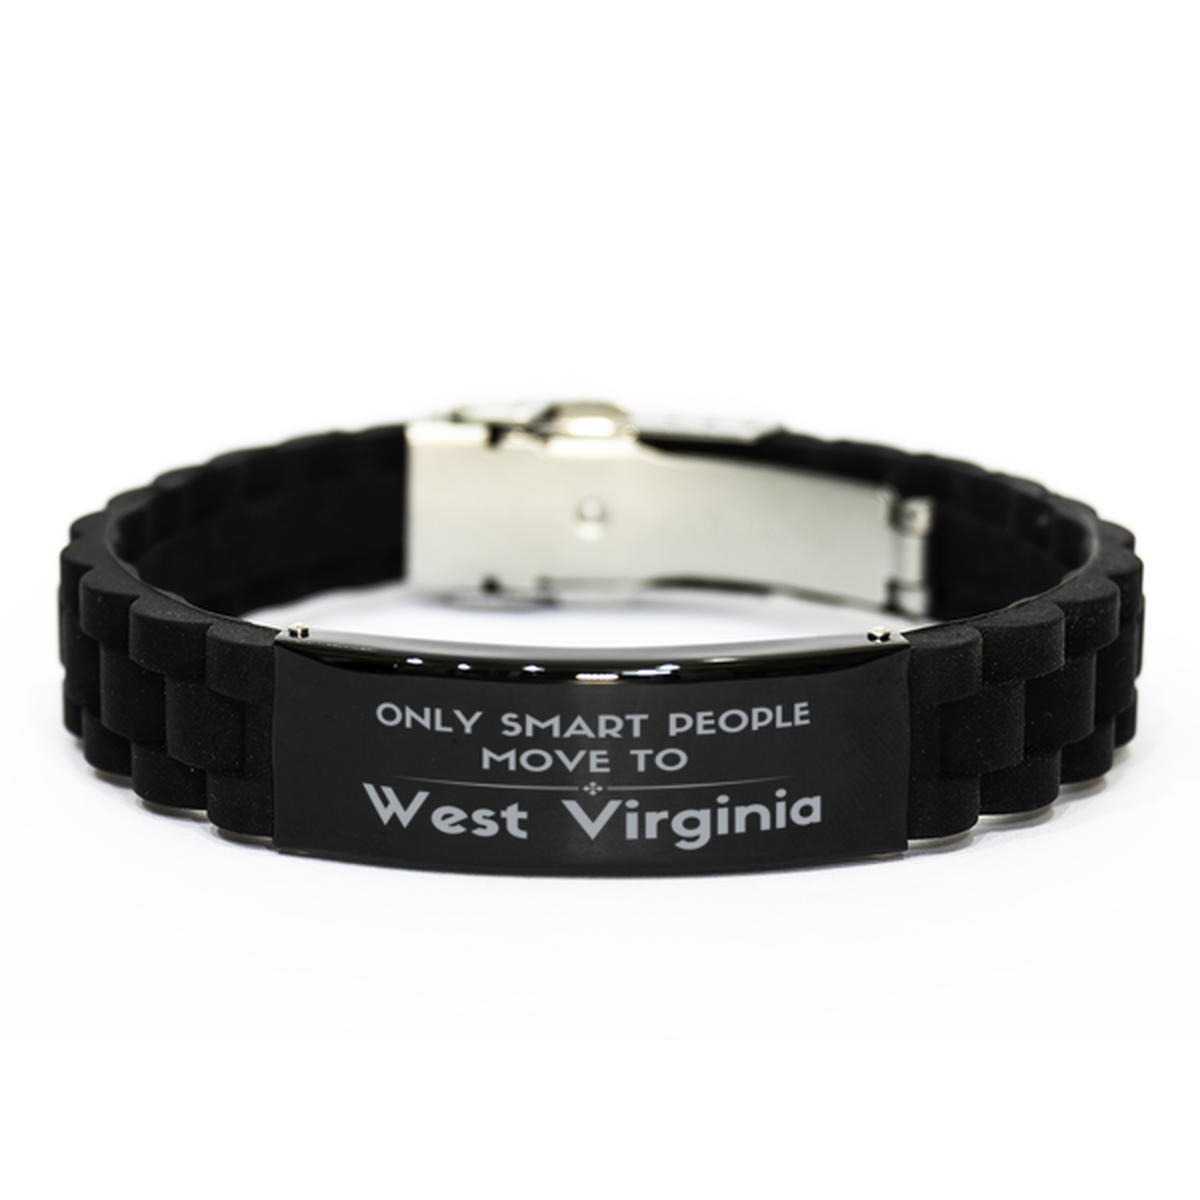 Only smart people move to West Virginia Black Glidelock Clasp Bracelet, Gag Gifts For West Virginia, Move to West Virginia Gifts for Friends Coworker Funny Saying Quote